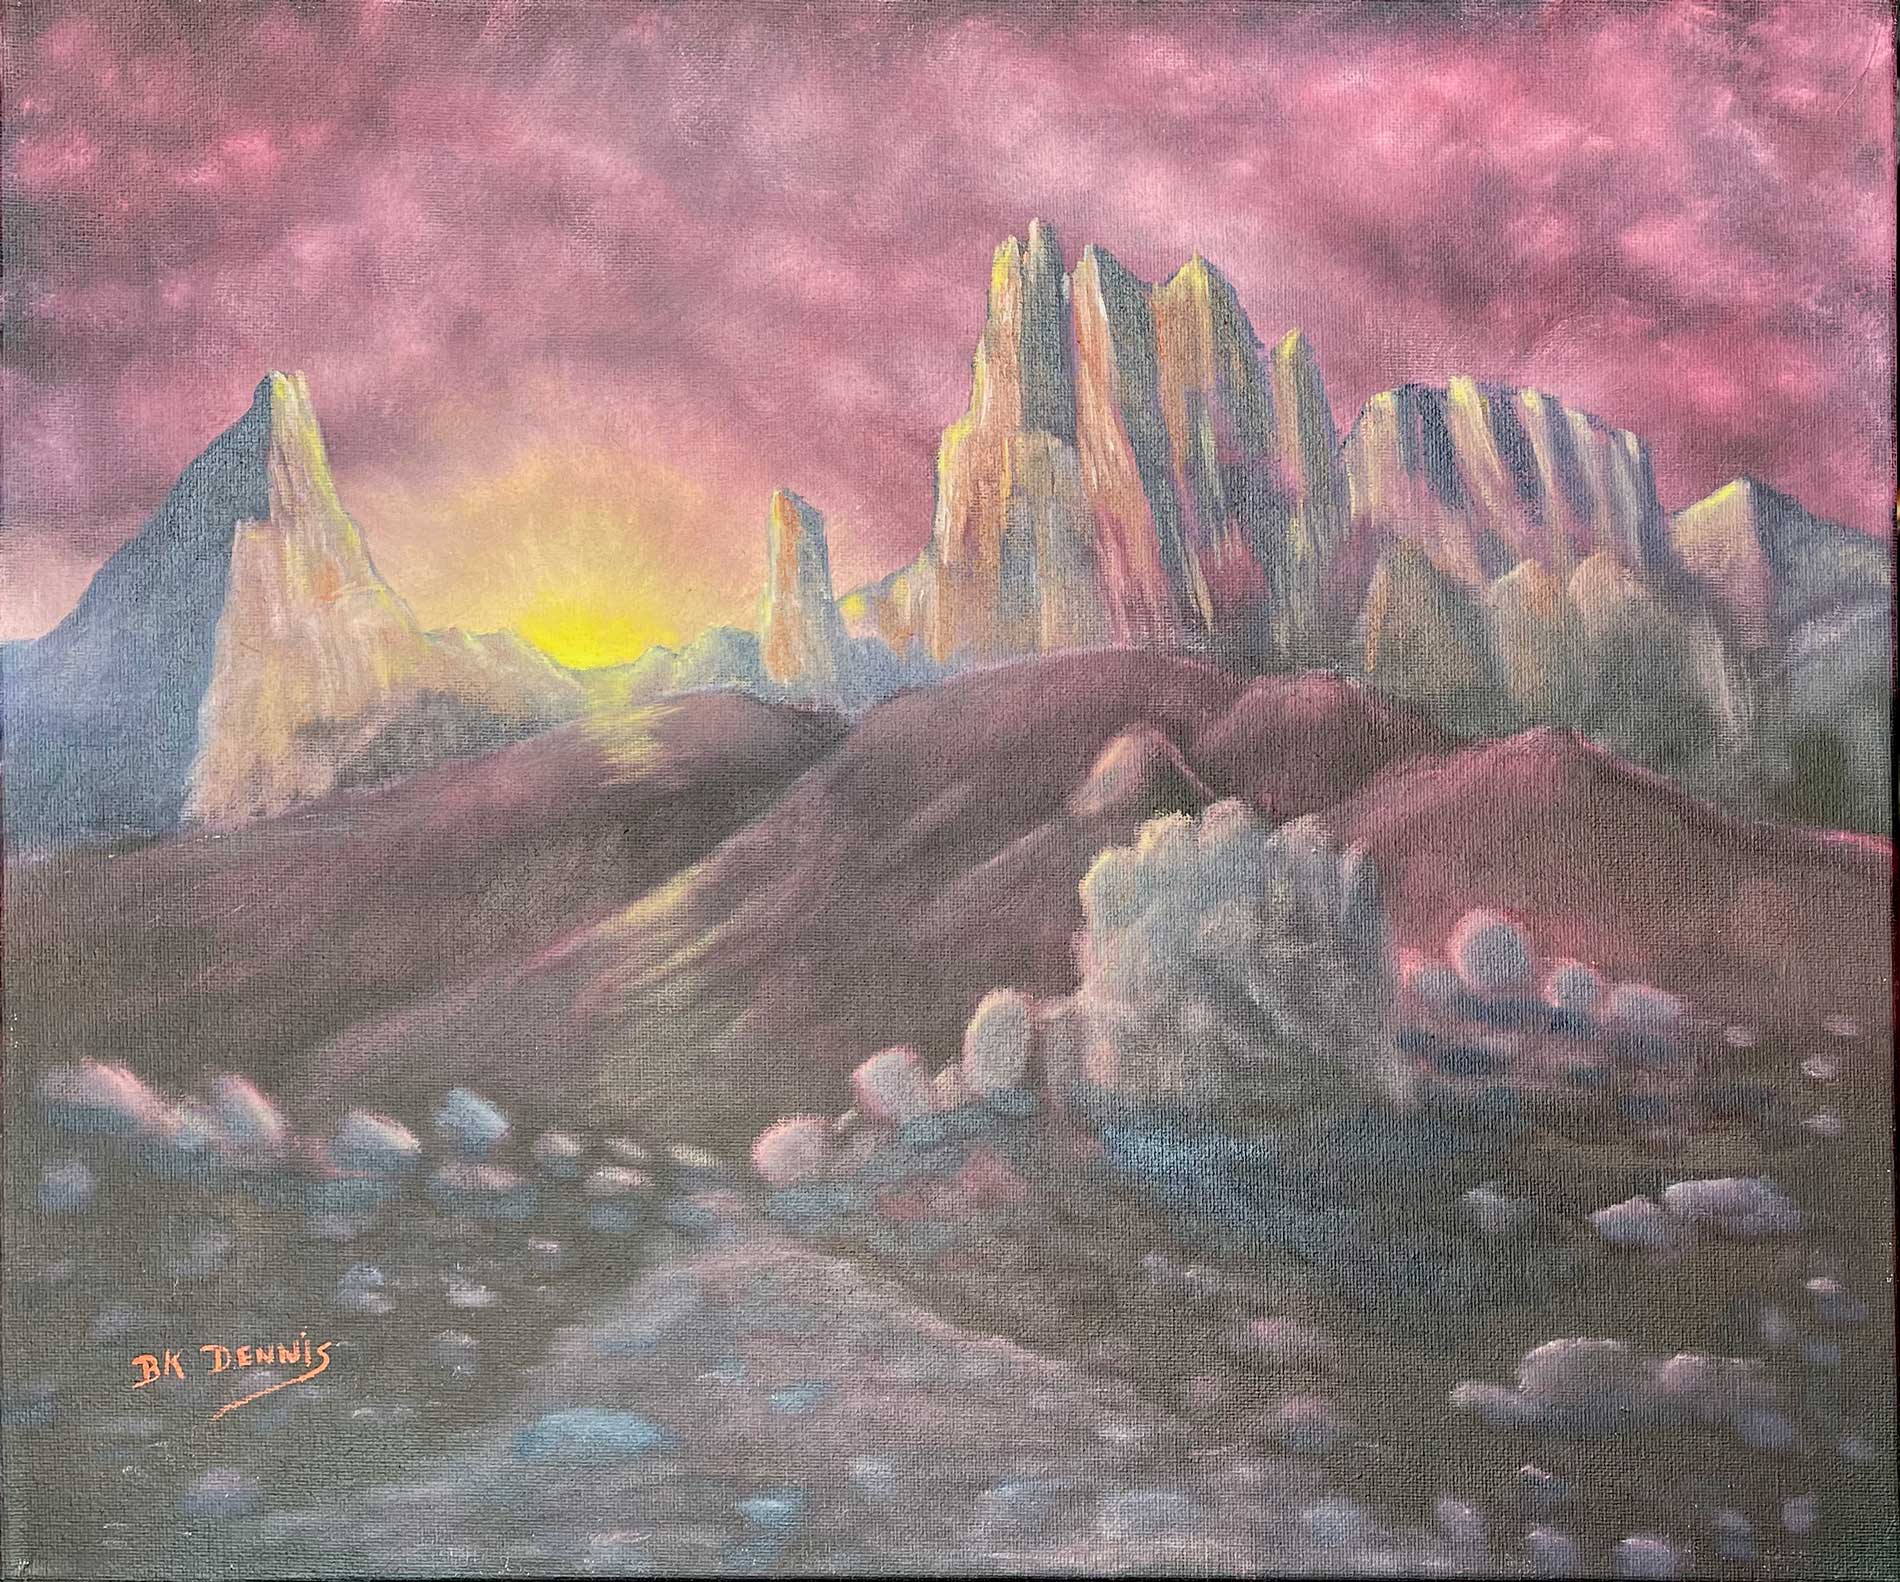 Oil painting by B.K. Dennis of a pink/purple sky behind a setting sun with sharp rock peaks in the foreground.